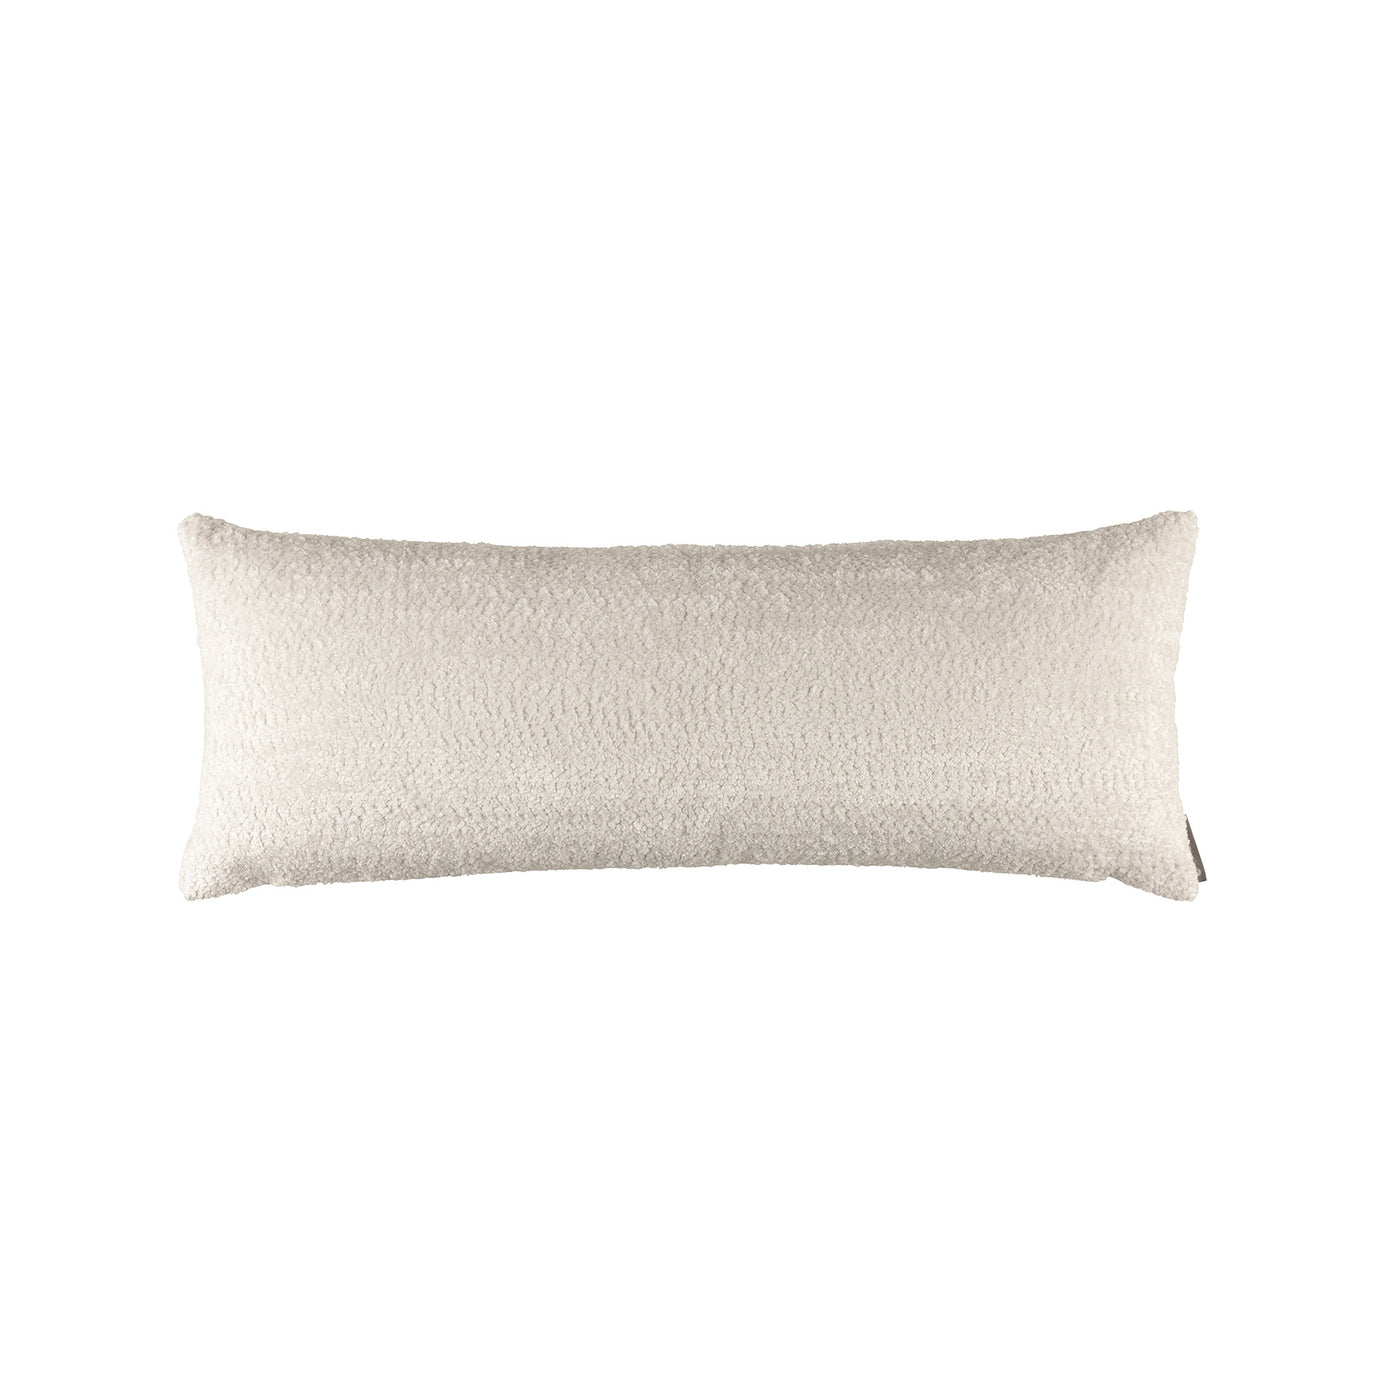 Zoey Oyster Long Rectangle Pillow (18x46)